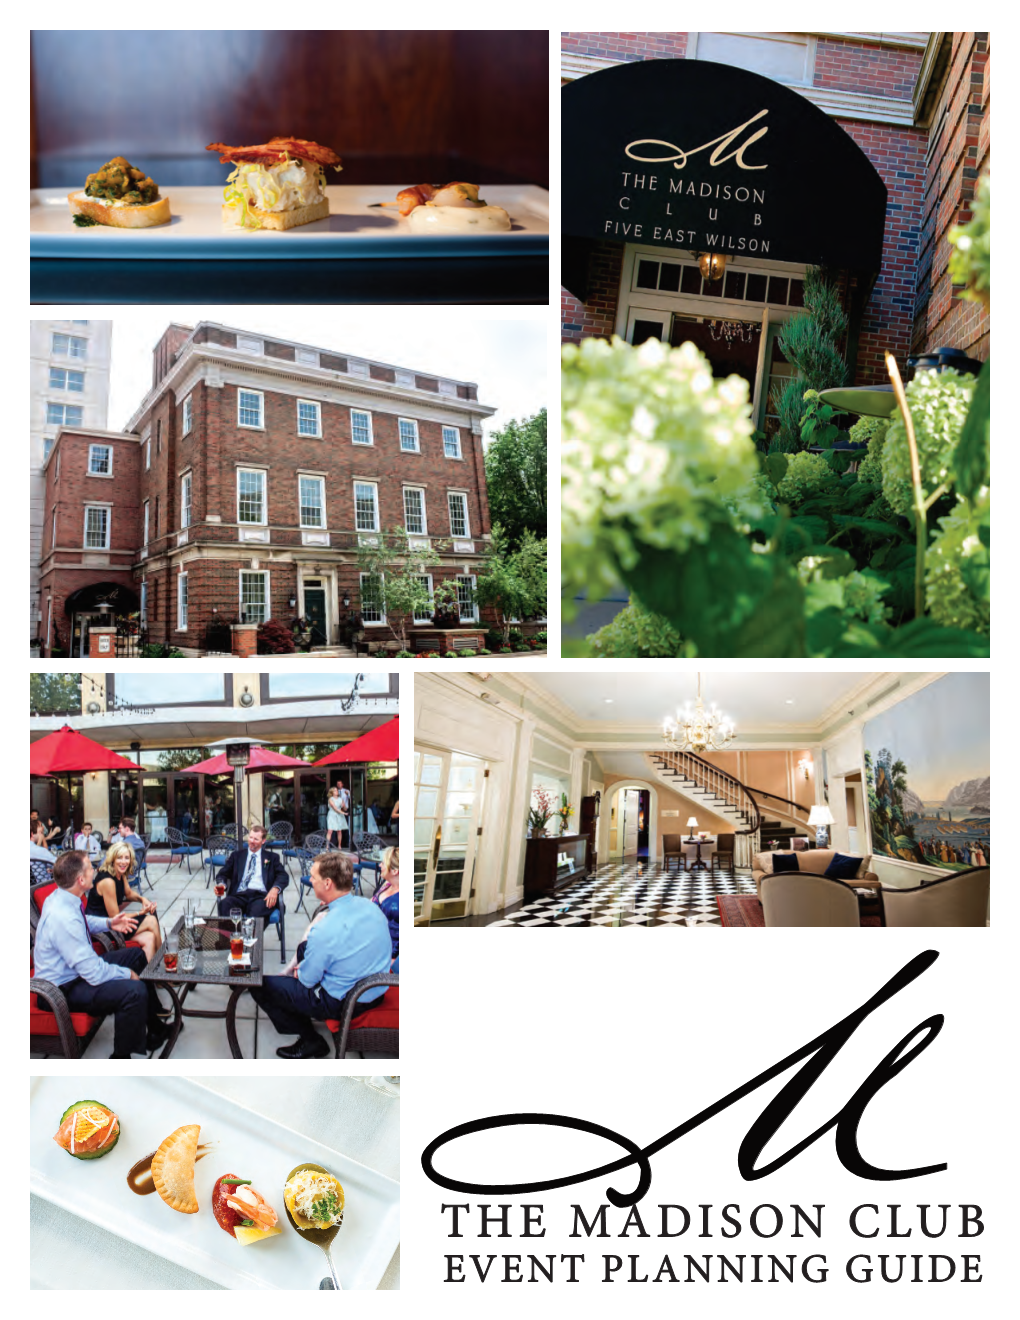 THE MADISON CLUB EVENTM PLANNING GUIDE Our Commitment to You